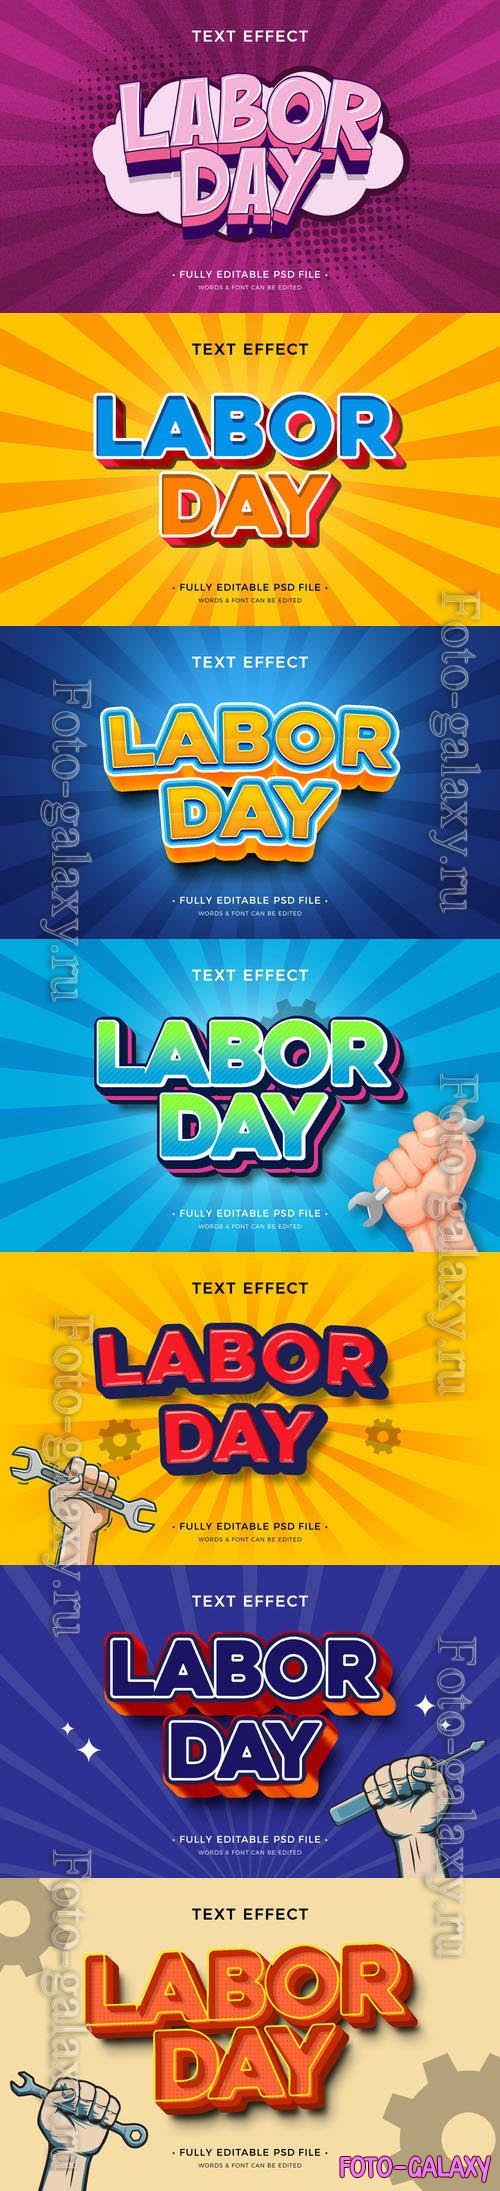 PSD labor day text effect